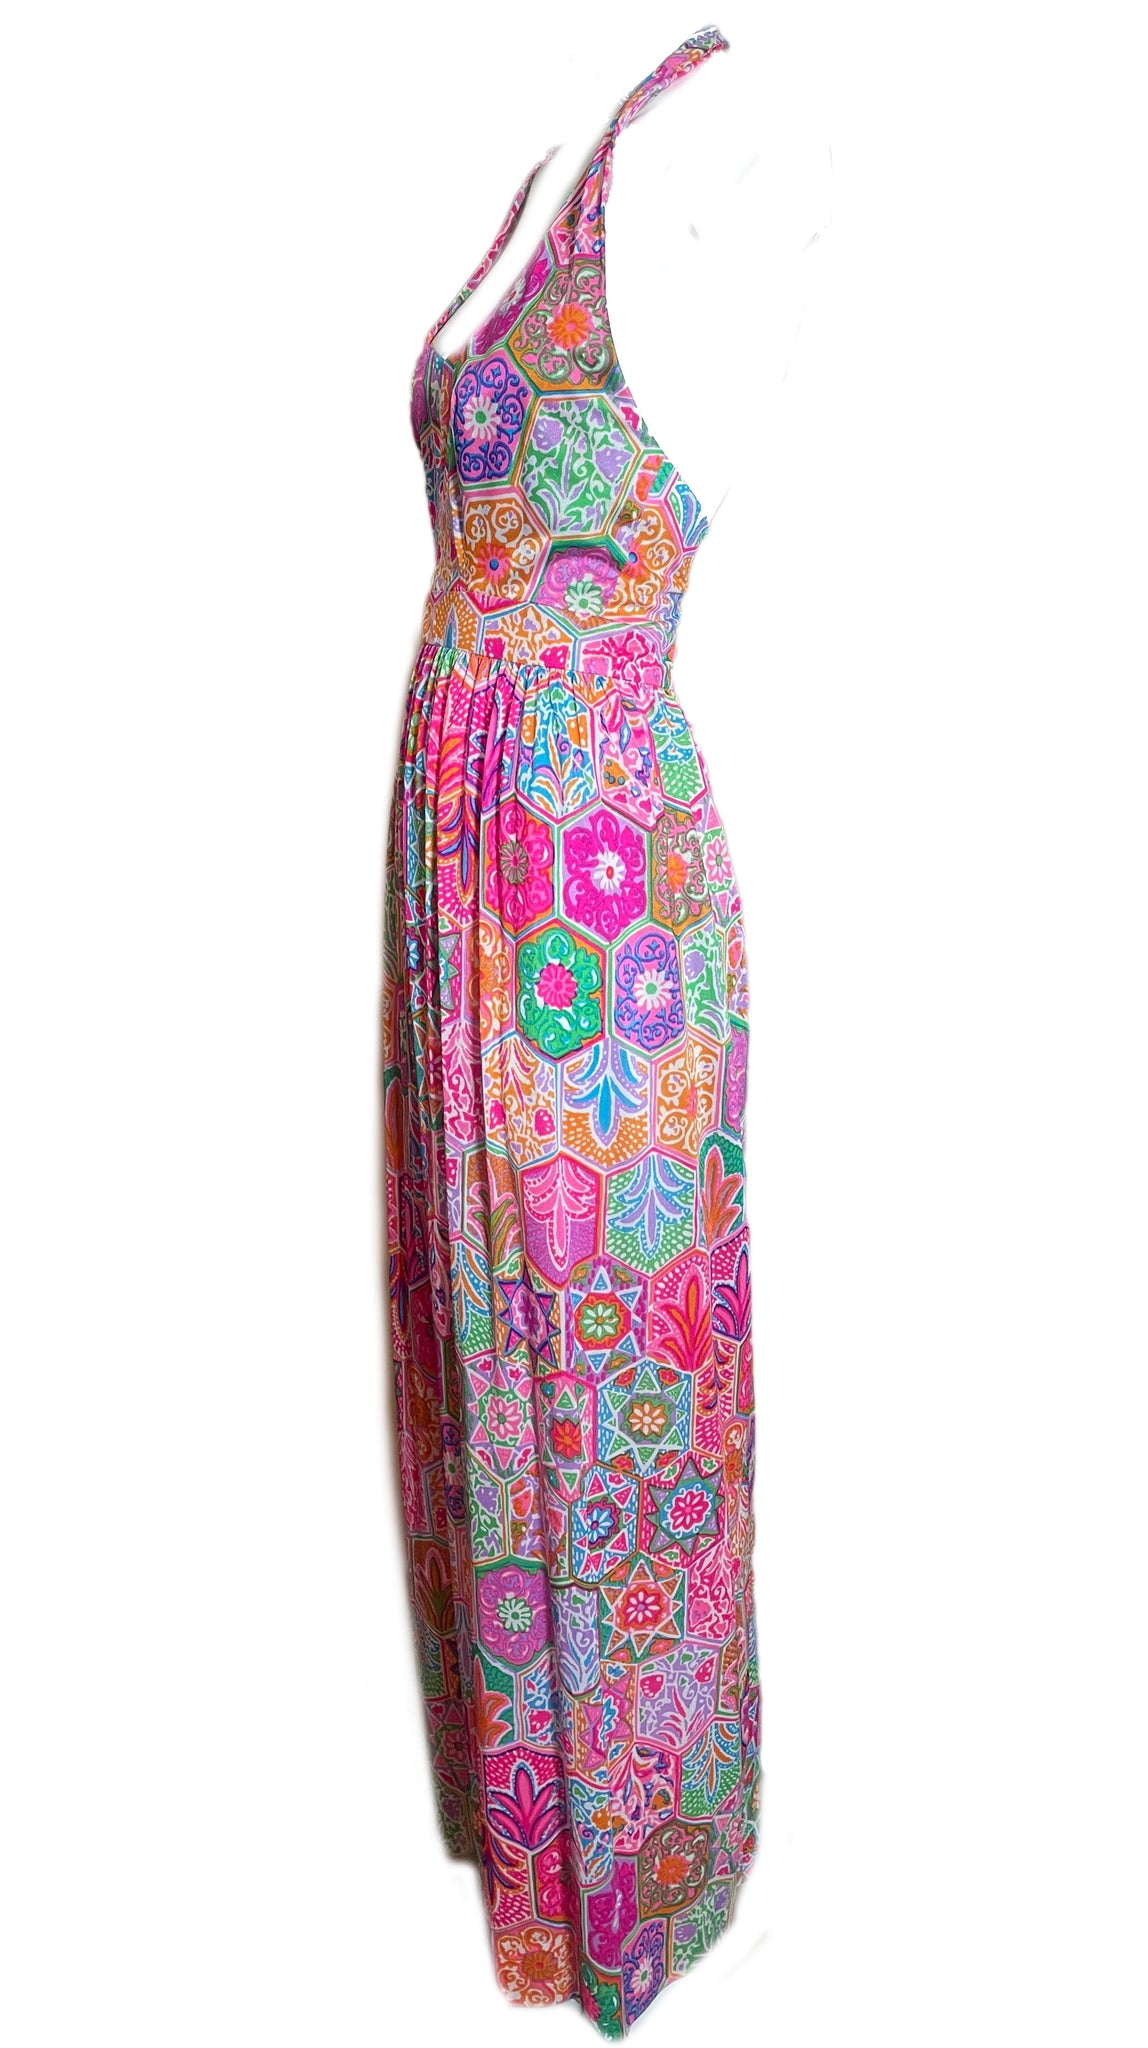  70s Acid Tone Psychedelic Polyester Halter Maxi Dress SIDE 2 of 5